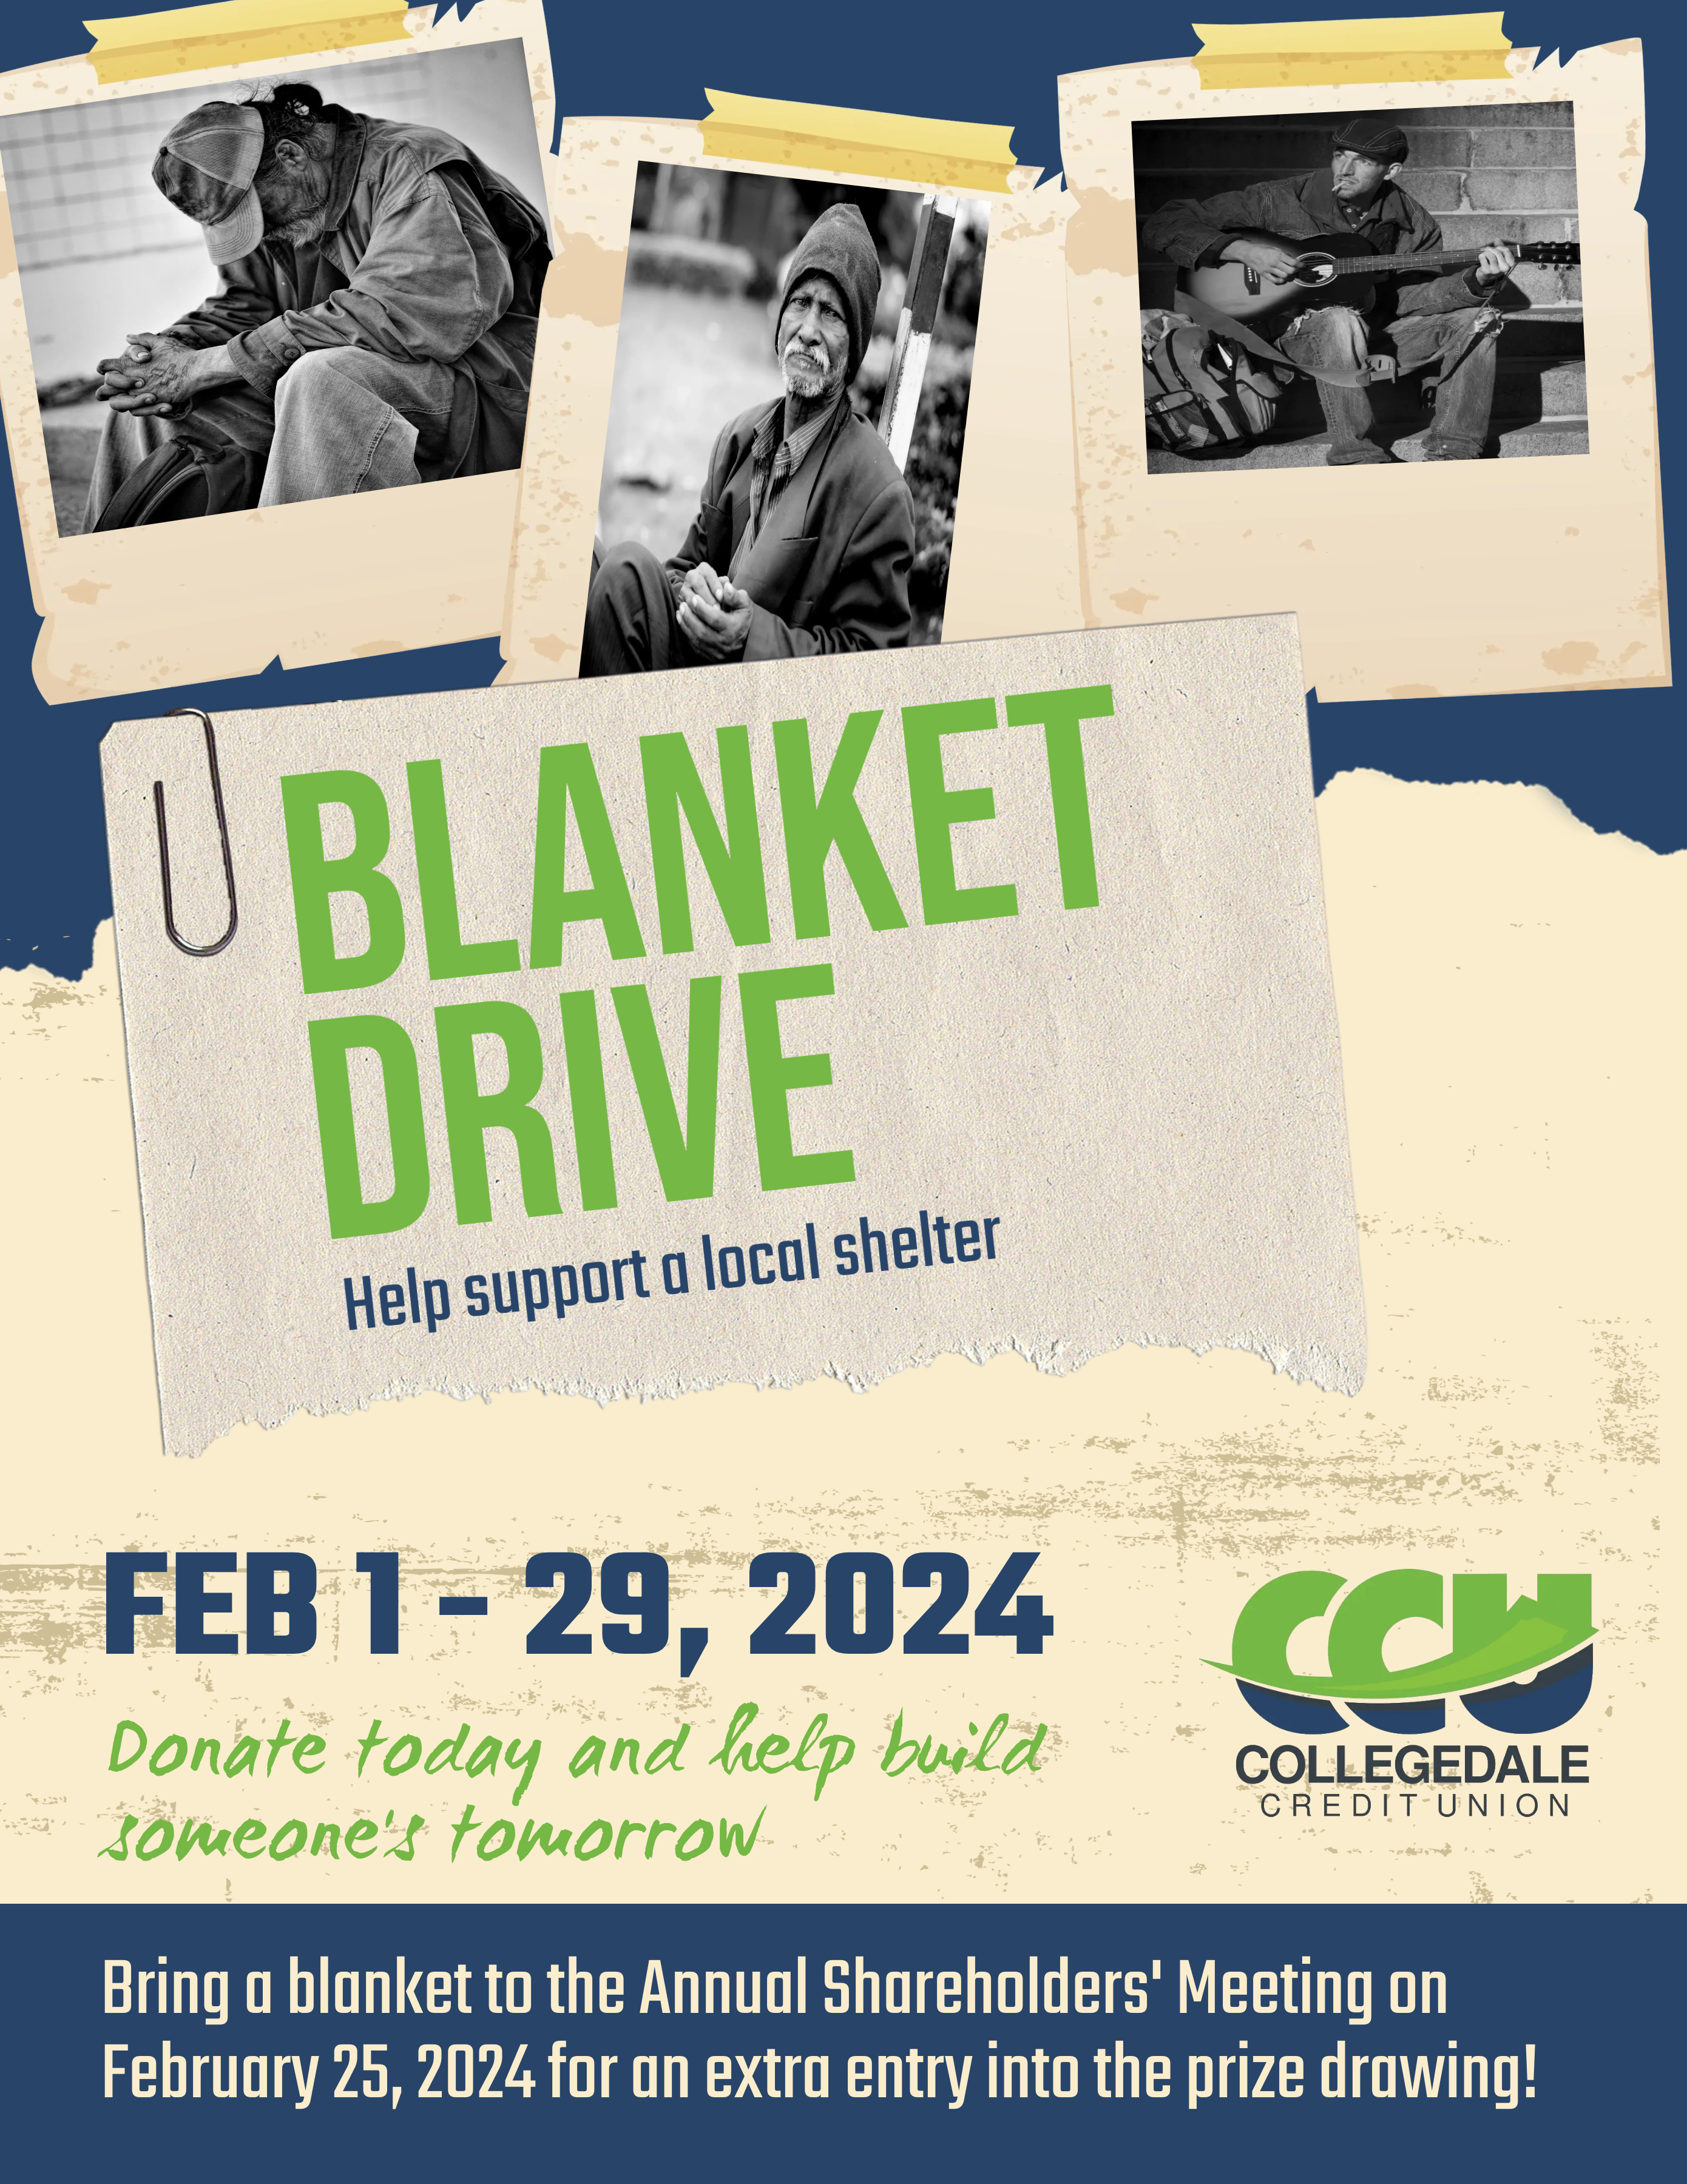 Blanket Drive.  Help support a local shelter.  Feb 1-29, 2024.  Donate today and help build someone's tomorrow.  Bring a blanket to the Annual Shareholders' Meeting on February 25, 2024 for an extra entry into the prize drawing!